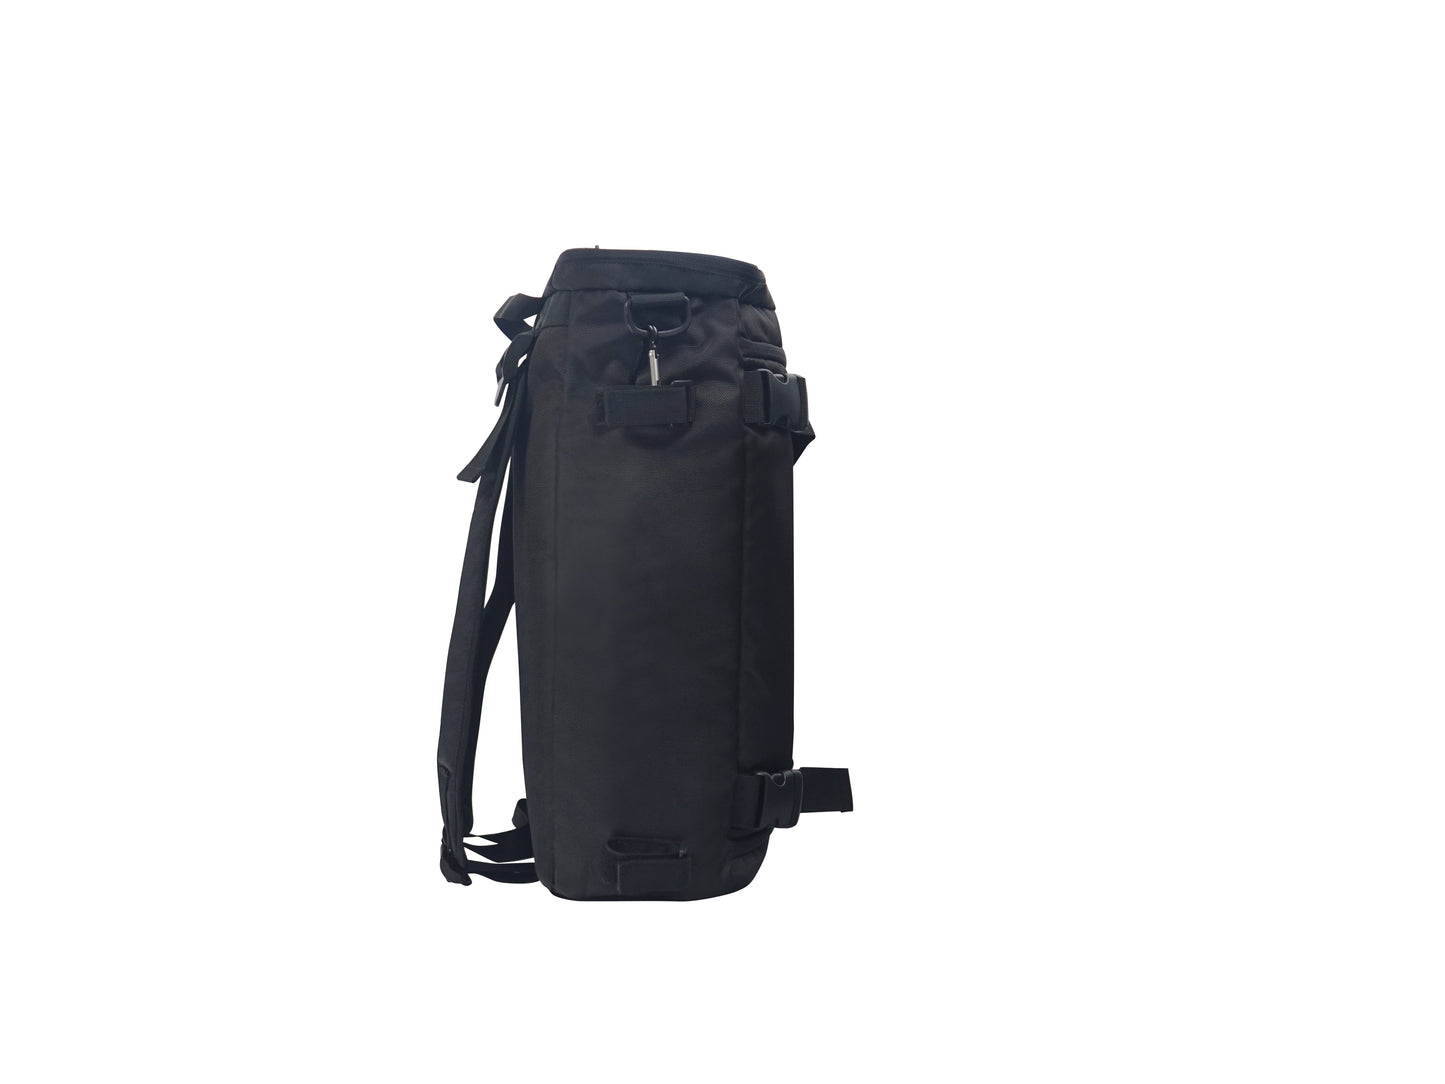 West Yorkshire HC - Accra Backpack - Black